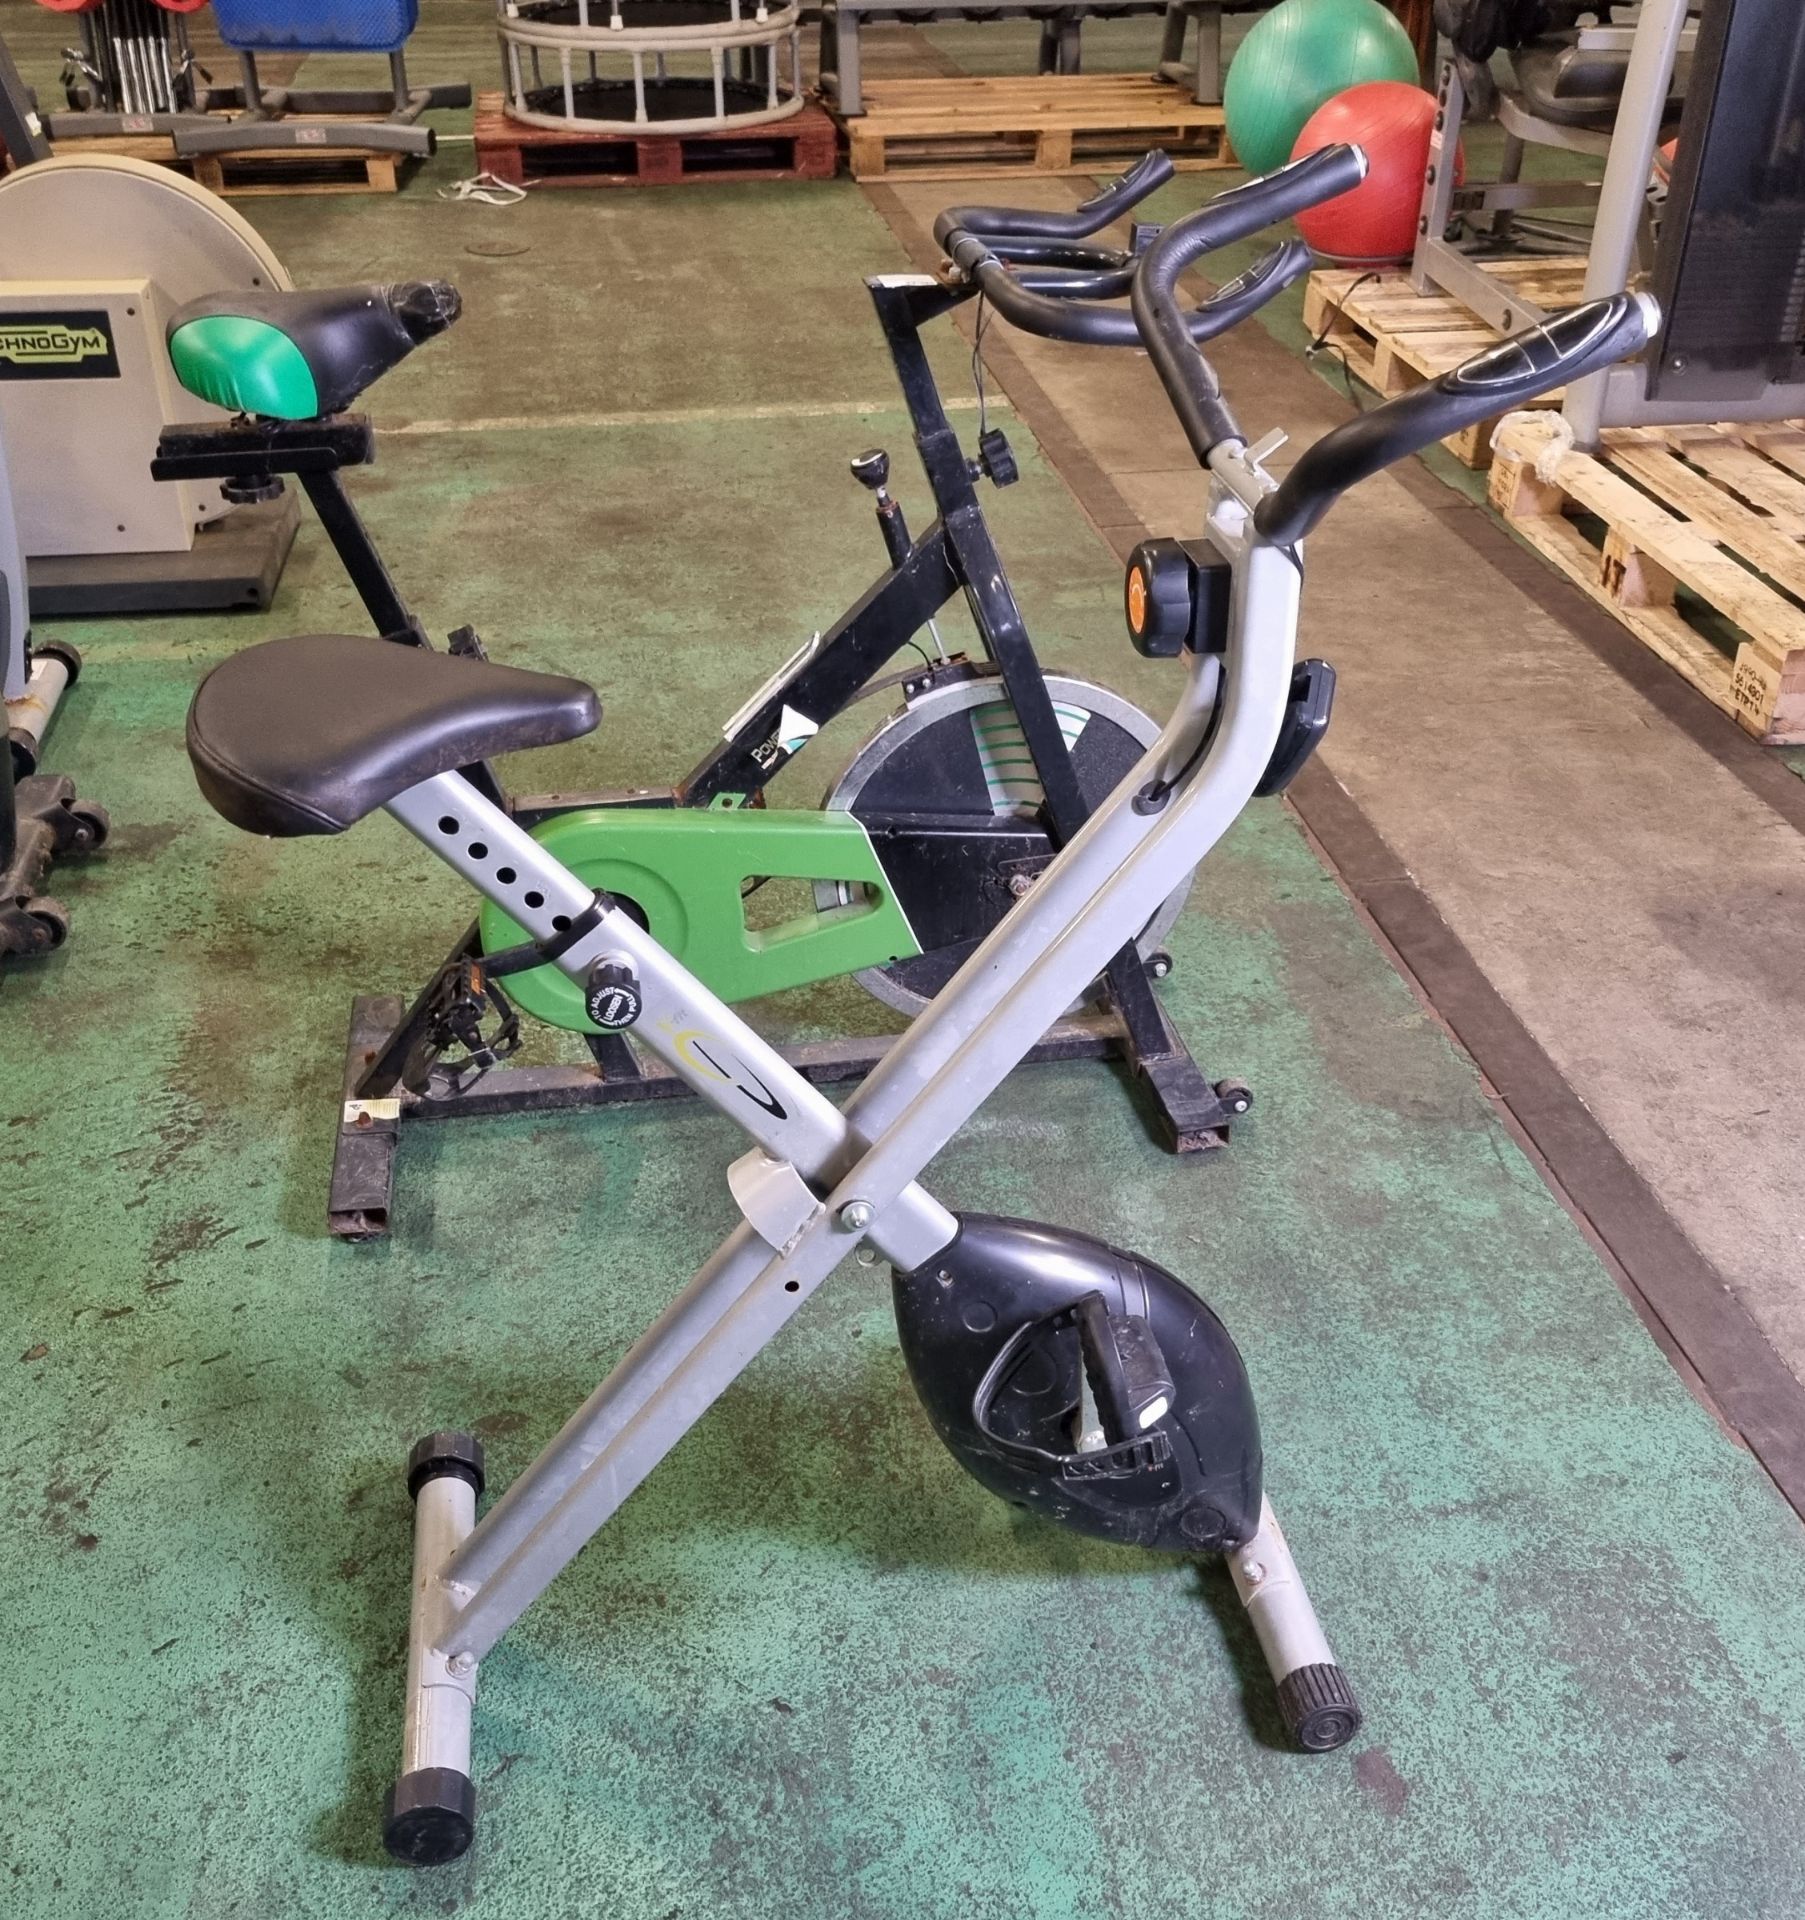 2x static exercise bikes - AS SPARES OR REPAIRS - Full details in the description - Image 4 of 9